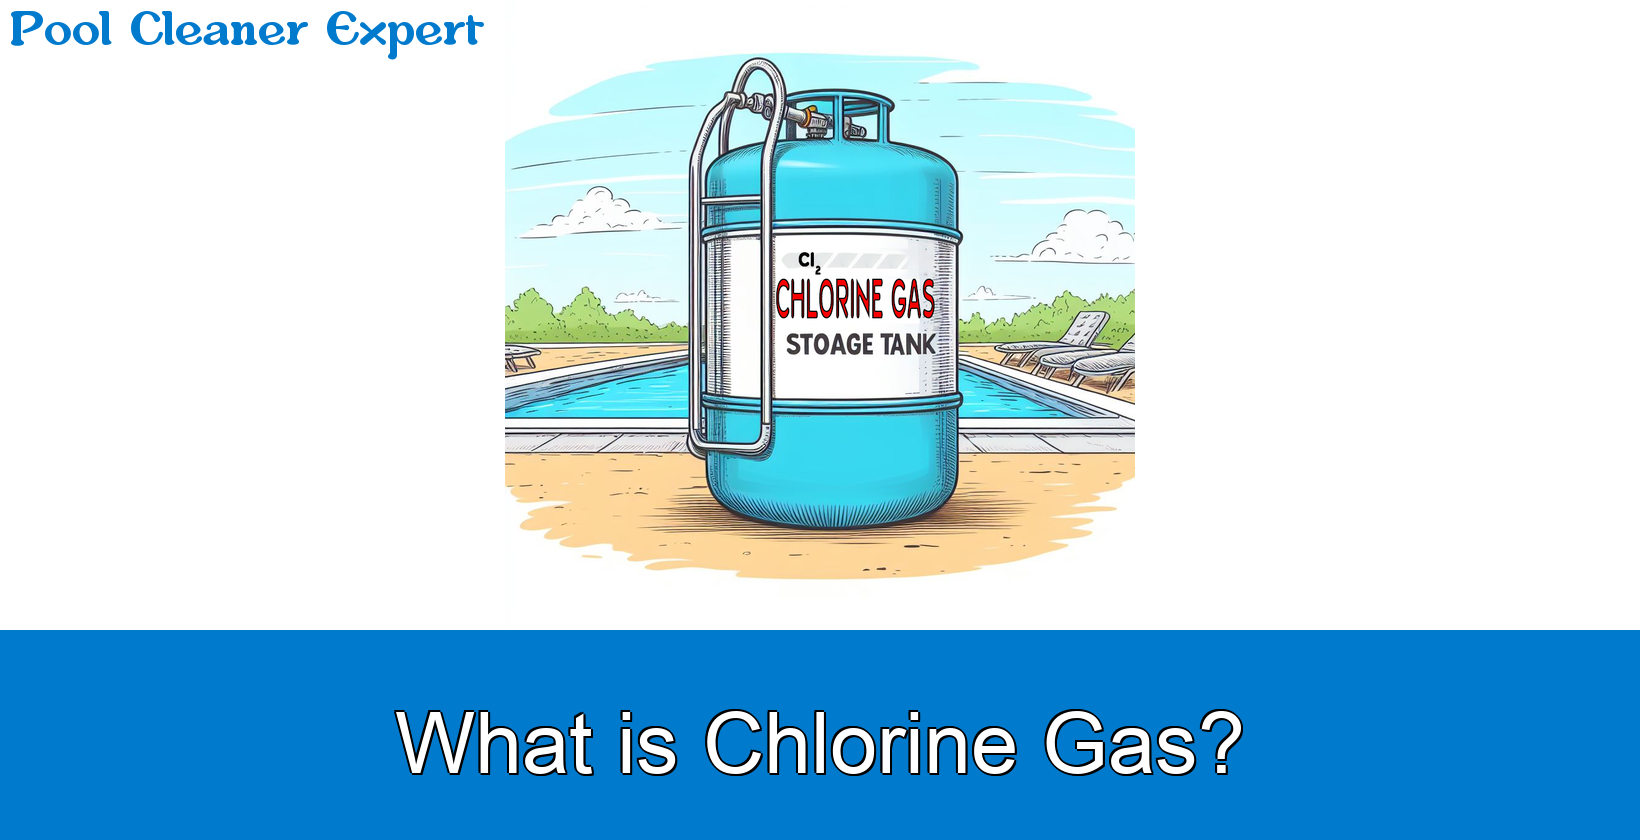 Chlorine Gas in Pools: All You Need to Know